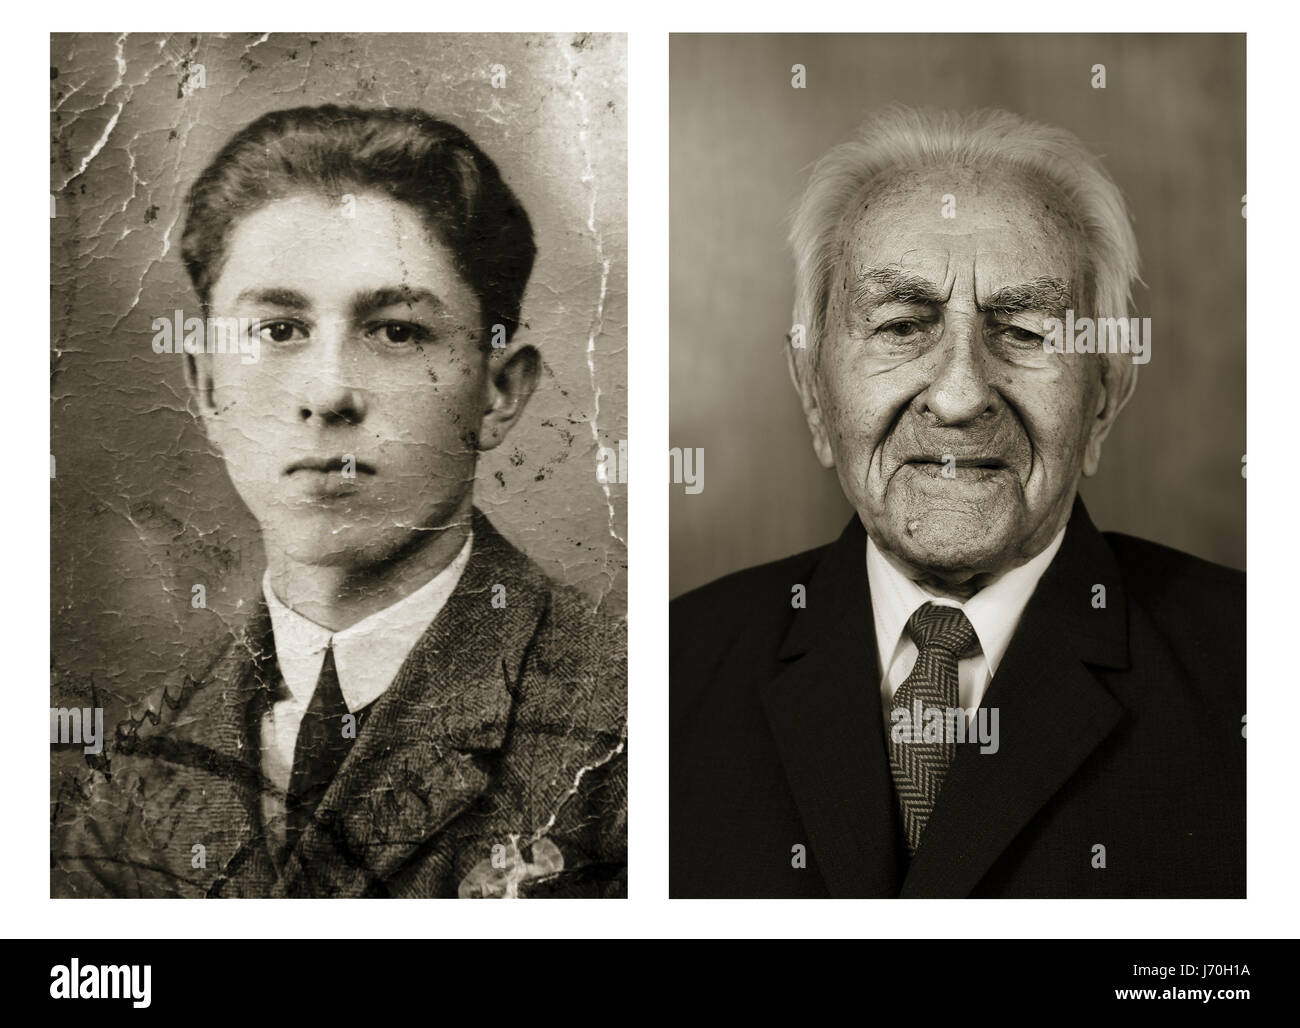 Antonín Baldrman. Left: 17 years old, right: 101 years old. He was a clerk and now lives in a retirement home in Blansko. POIGNANT portraits have posed centenarians alongside their younger selves in a project called Faces of Century. The incredible images tell the unique stories of each person’s life including one woman who was in the truck that hit and killed high-ranking German Nazi official Reinhard Heydrich’s son Klaus in 1943. Another intriguing tale comes from a 101-year-old woman who decided to leave her luxury villa after turning 101 and burnt all material memories of her life includin Stock Photo